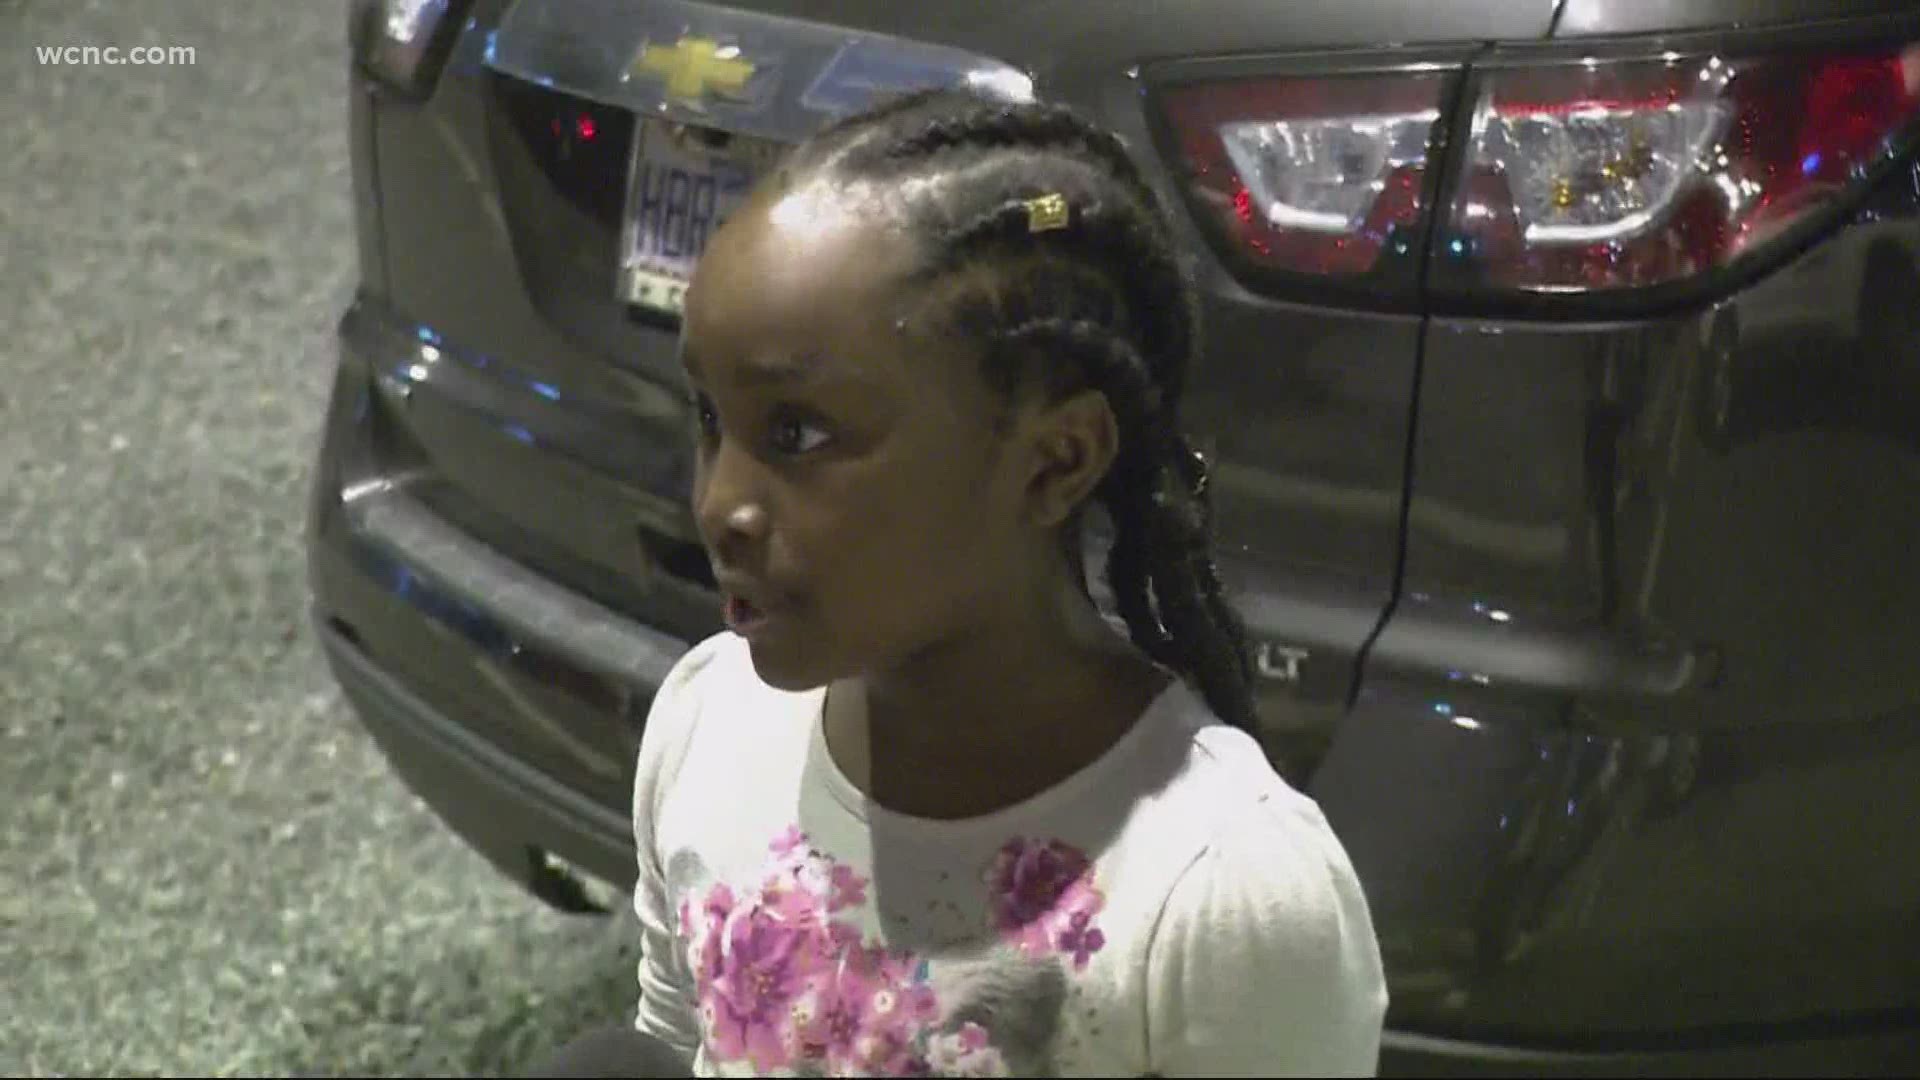 A 9-year-old girl in attendance at the Charlotte protests told WCNC about George Floyd, "he had a daughter, he just wanted to live."